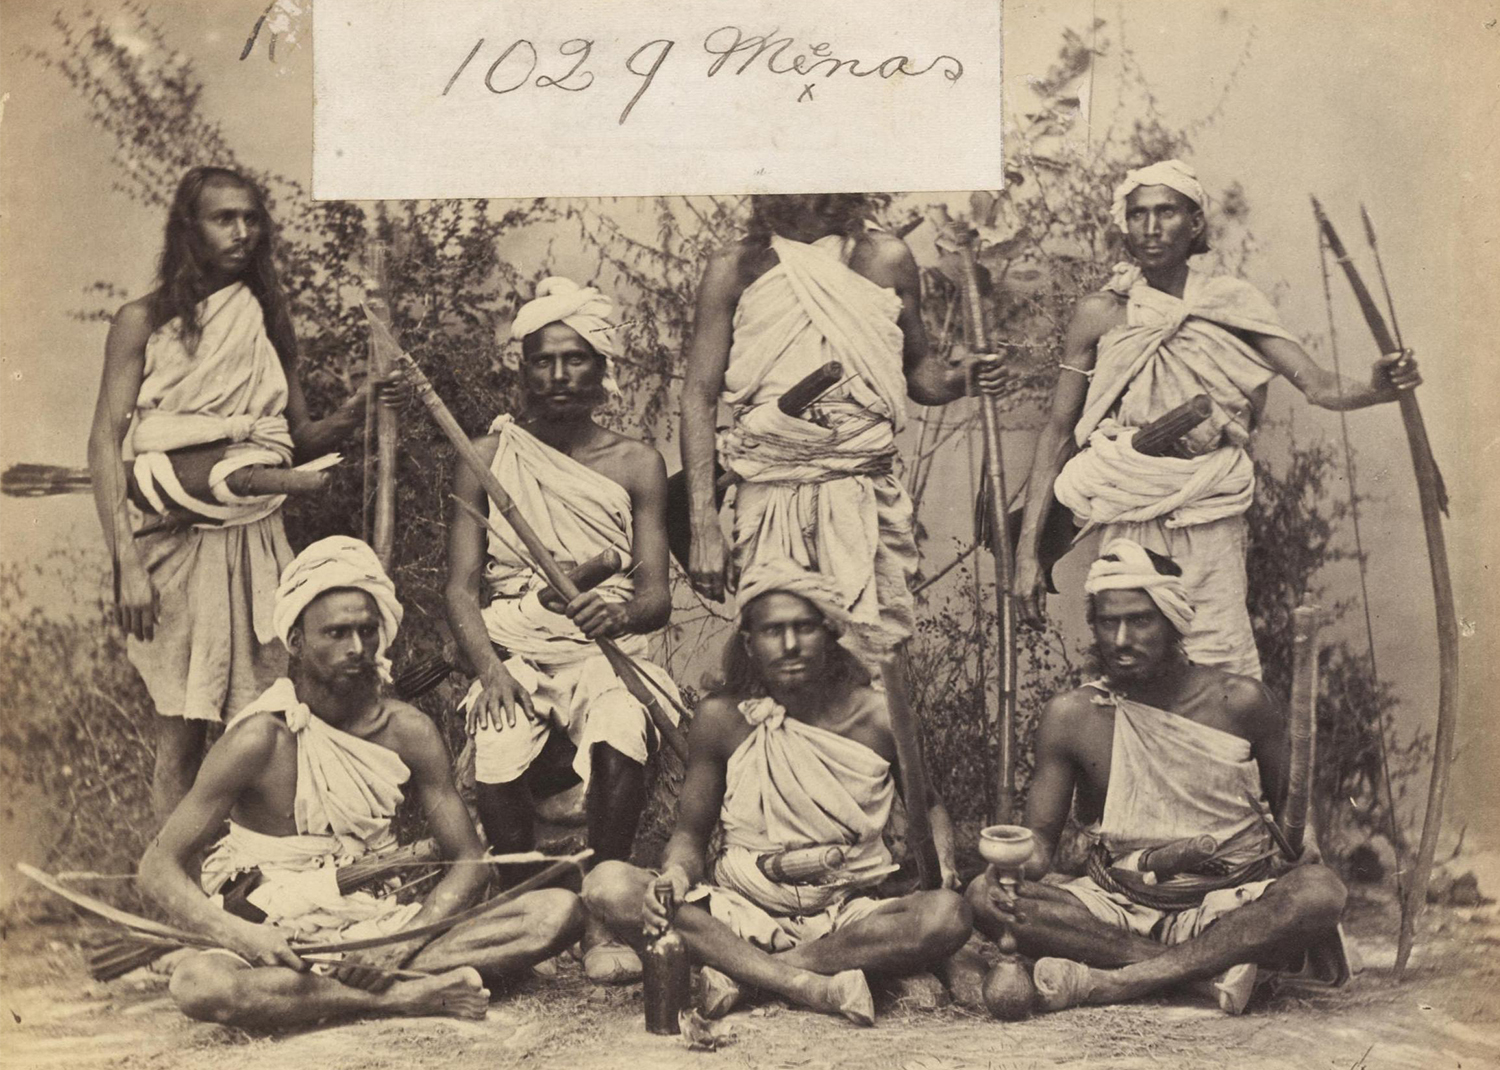 A sepia-toned group photograph of men from the Meena tribe dressed in white cloth and bearing bows and arrows.